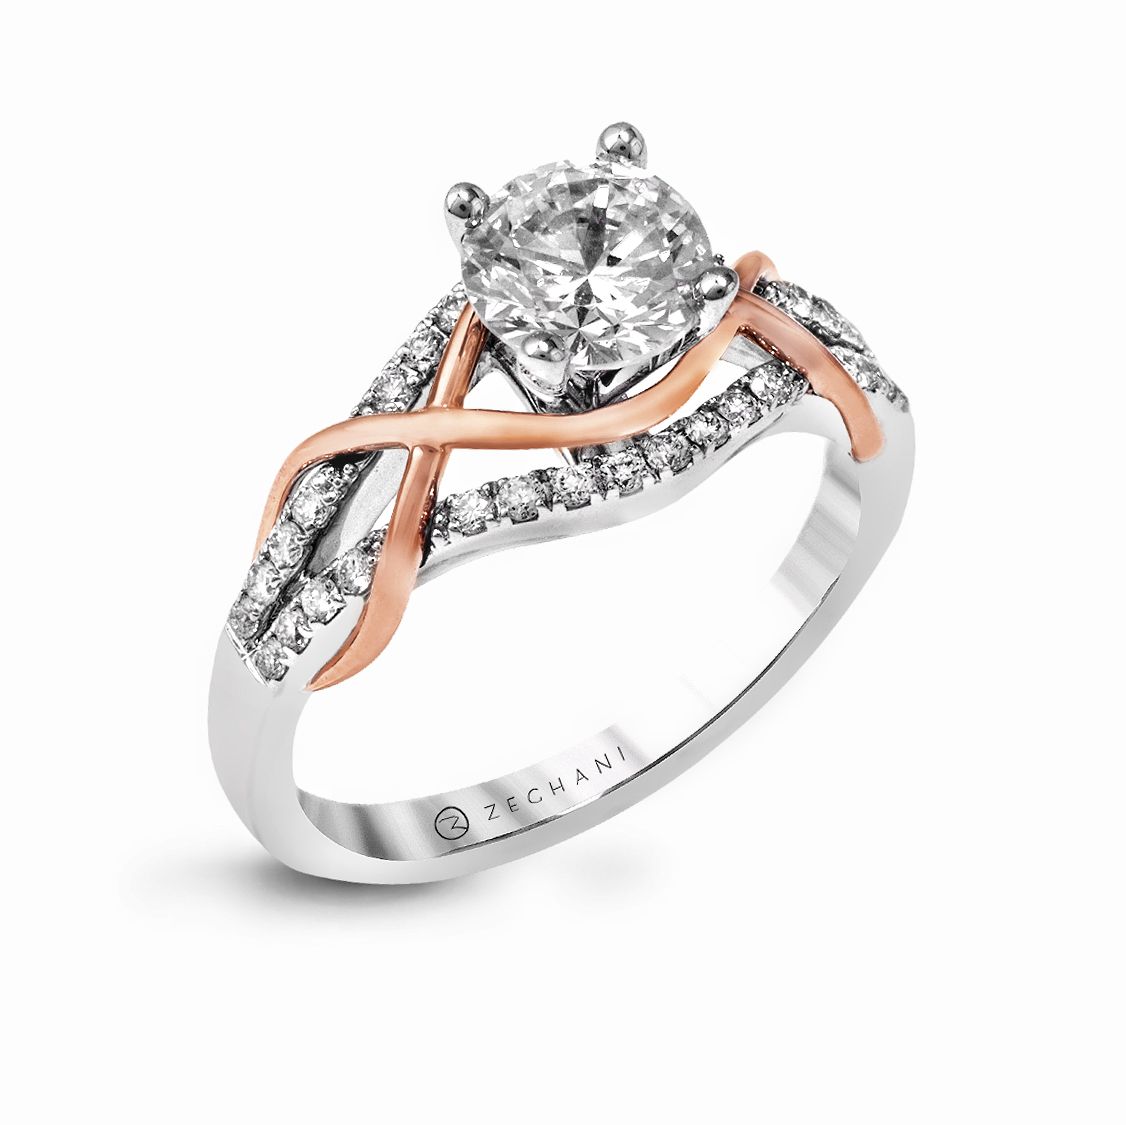 Wedding Ring : White And Rose Gold Engagement Home Designers With Regard To Most Popular Ribbon Diamond Wedding Bands (View 18 of 25)